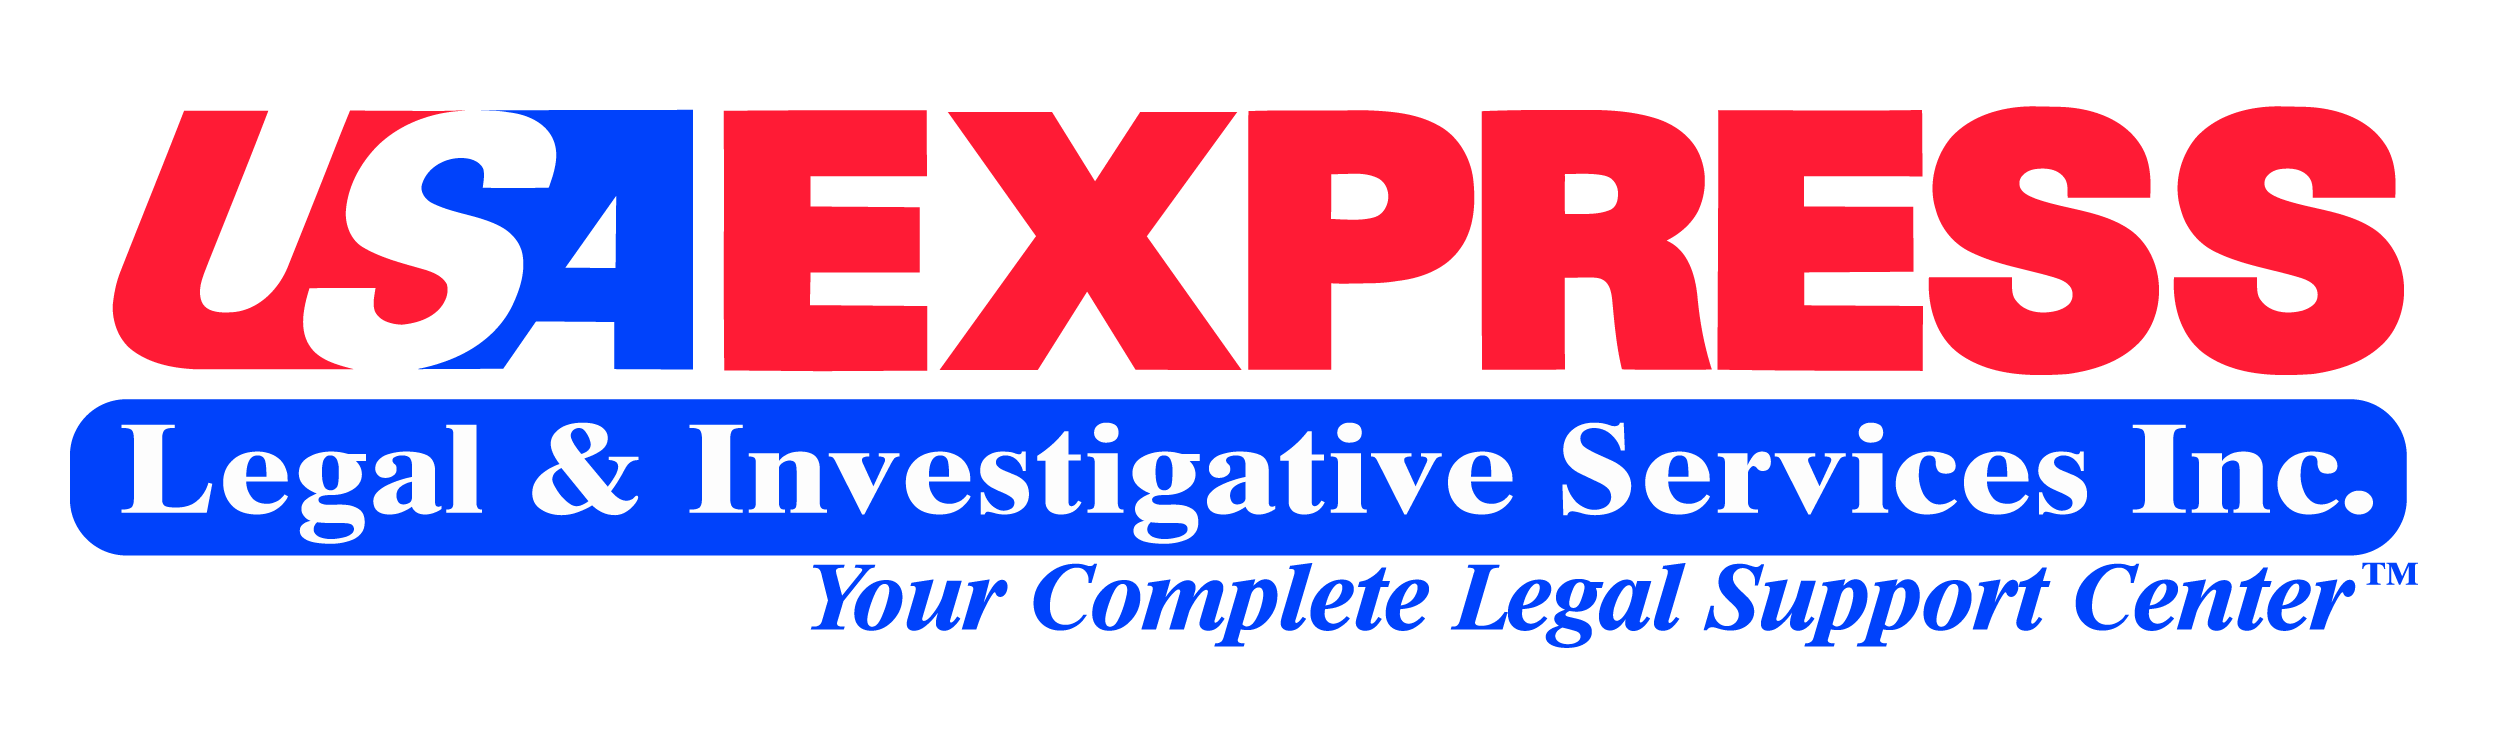 USA Express Legal & Investigative Support Services